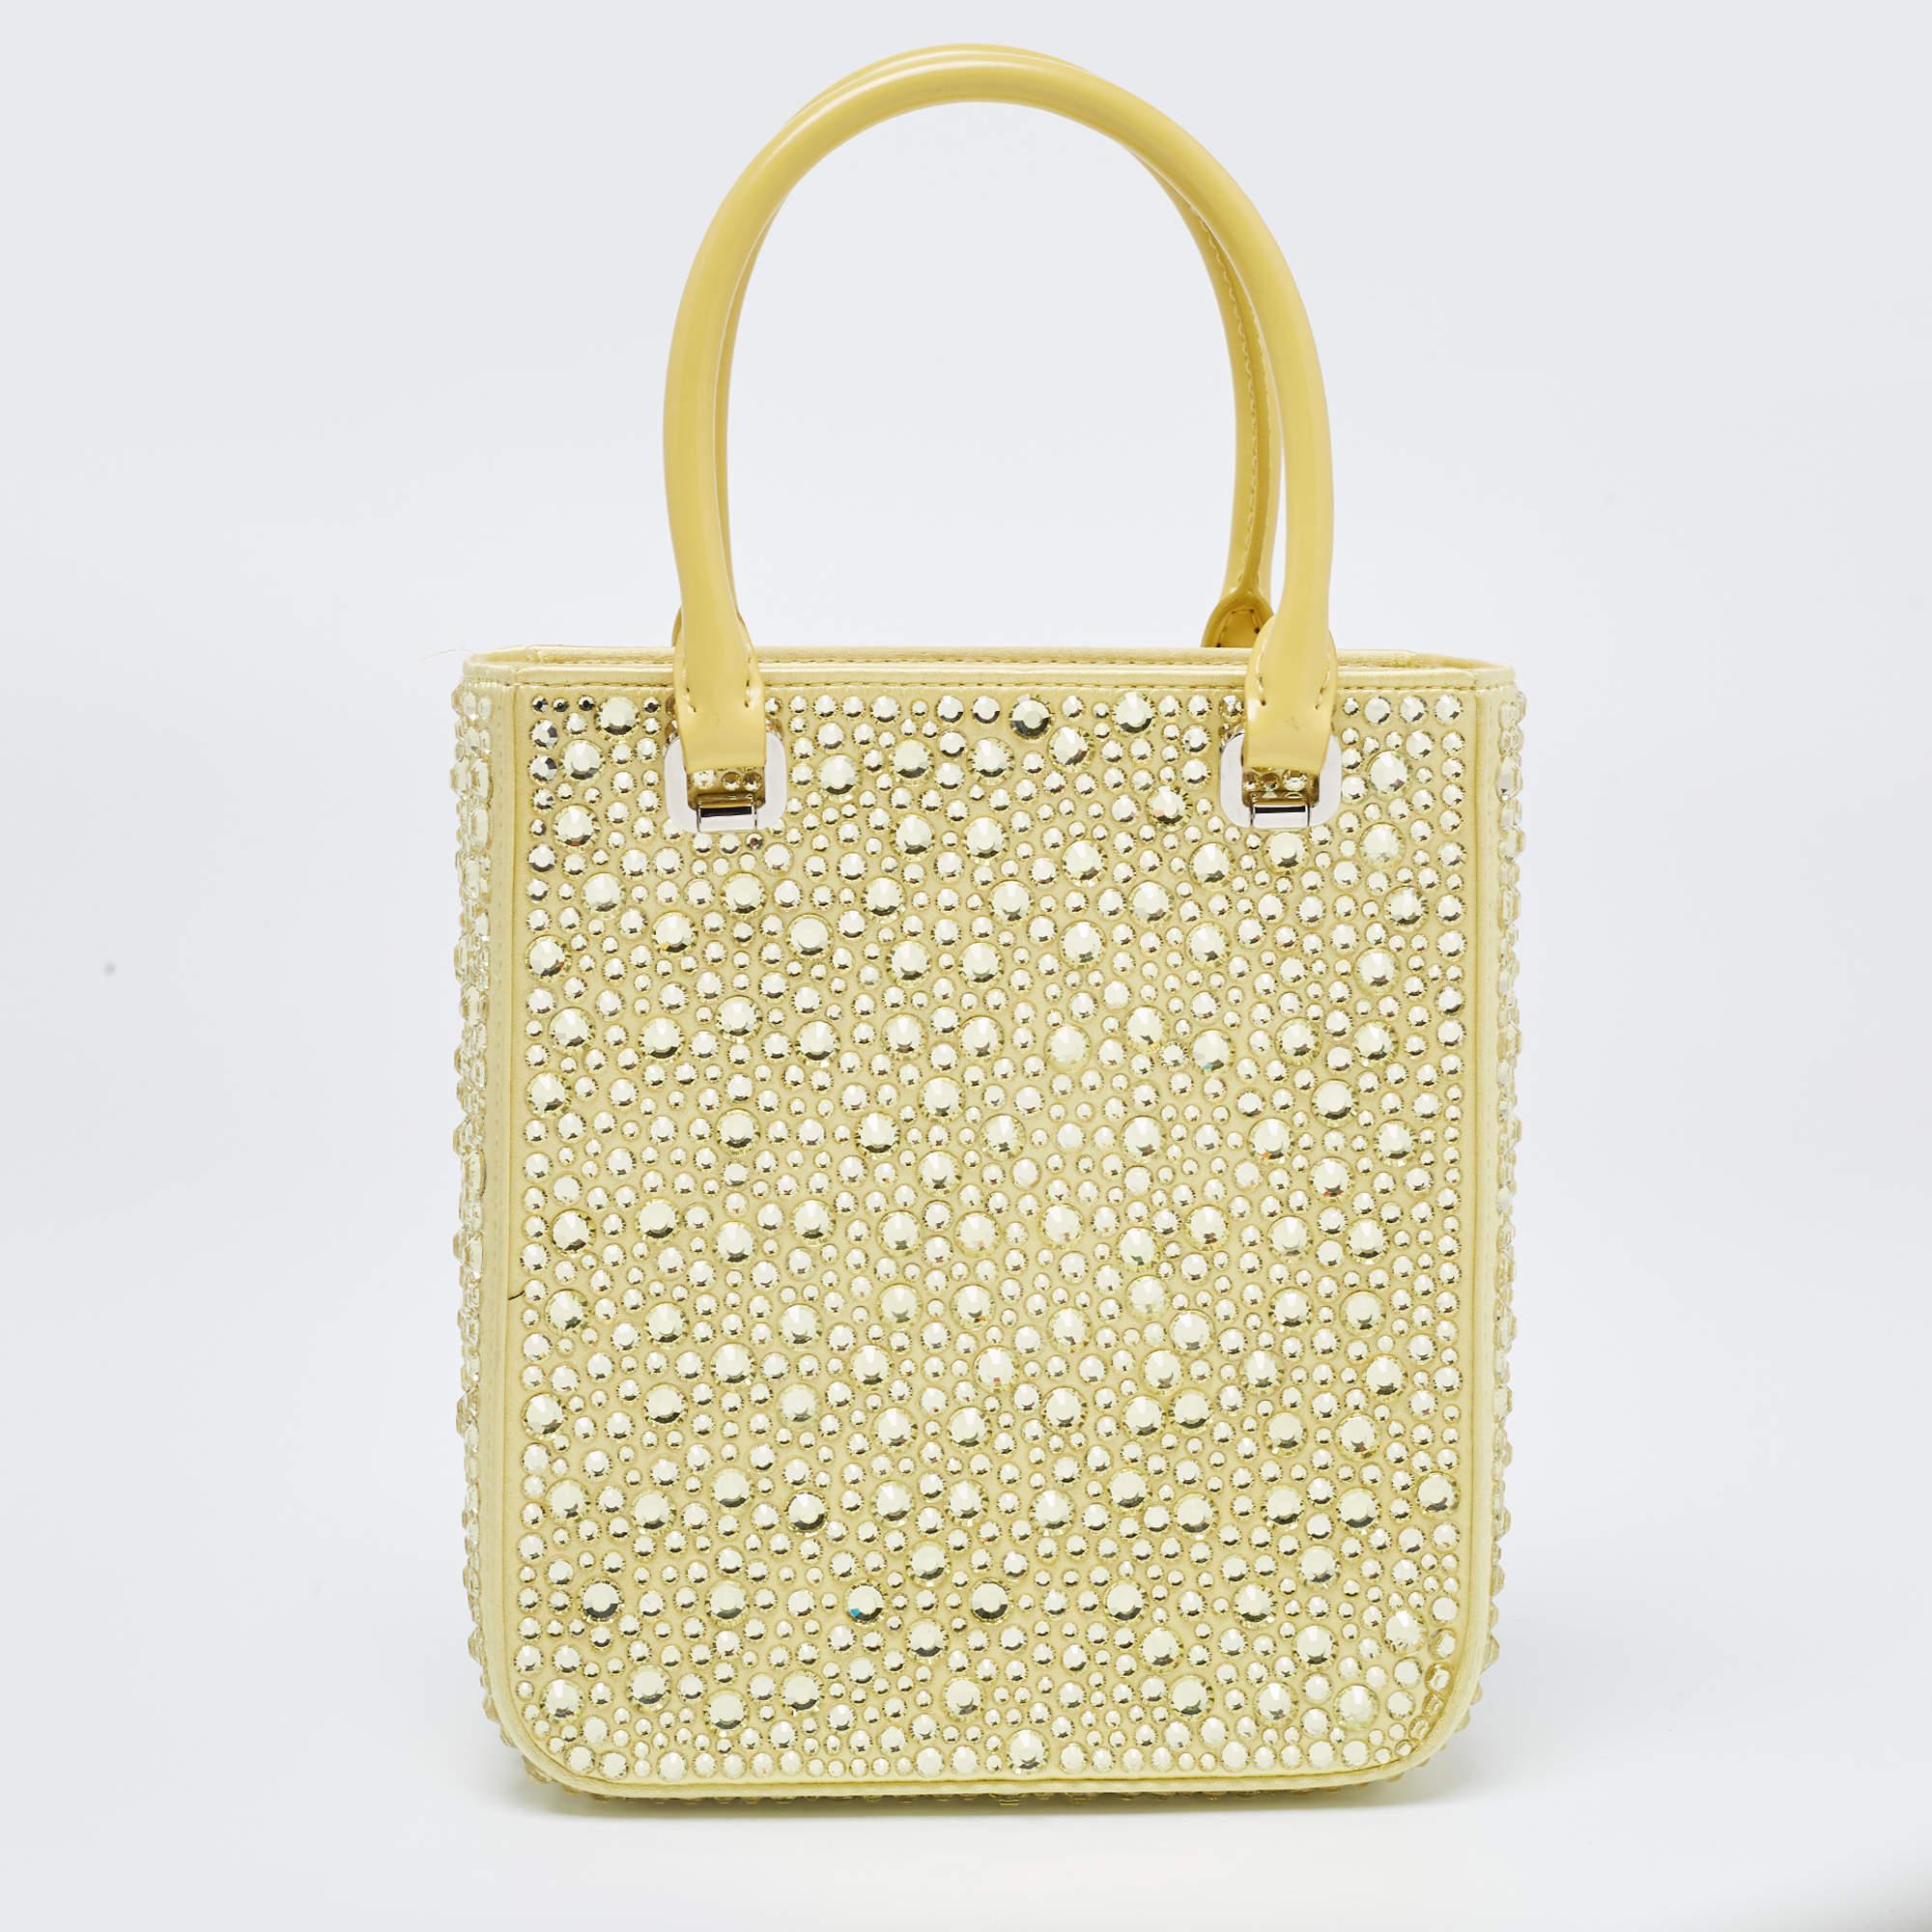 The Prada tote is a luxurious and eye-catching accessory. Crafted from vibrant yellow satin, it features intricate crystal embellishments that add a touch of glamour and sophistication. With its compact size and tote design, this bag seamlessly